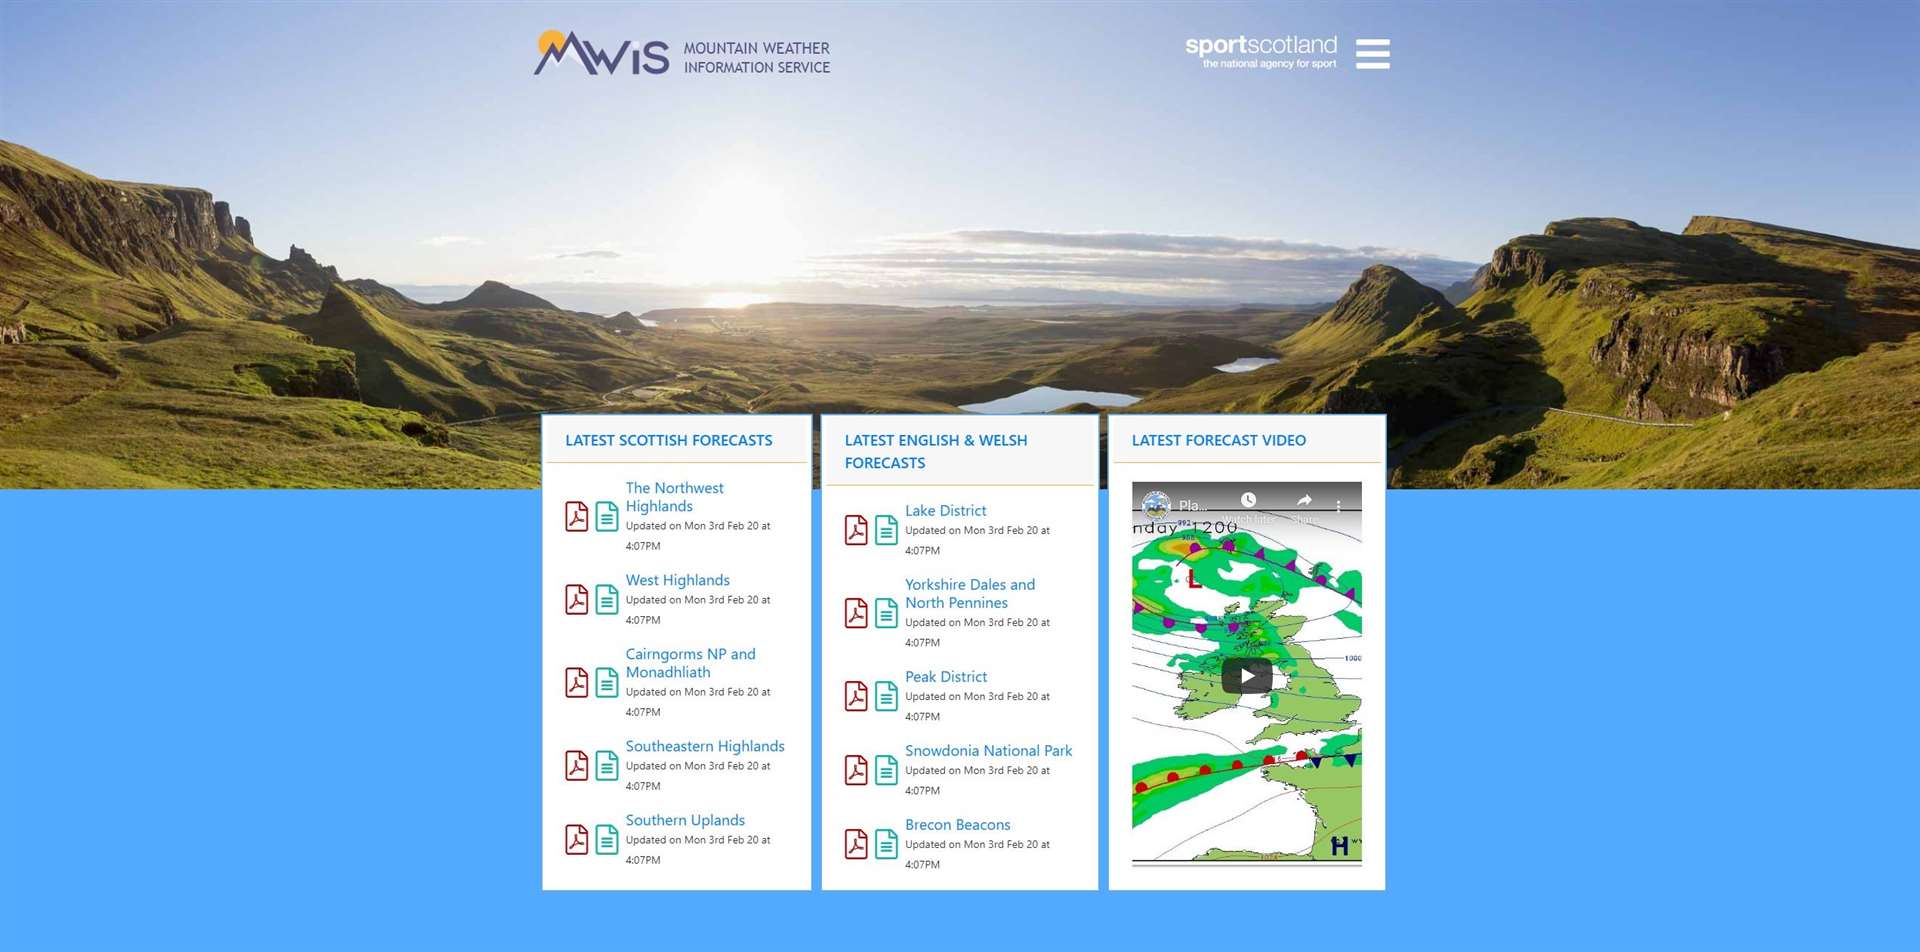 The Mountain Weather Information Service has launched a new responsive website.